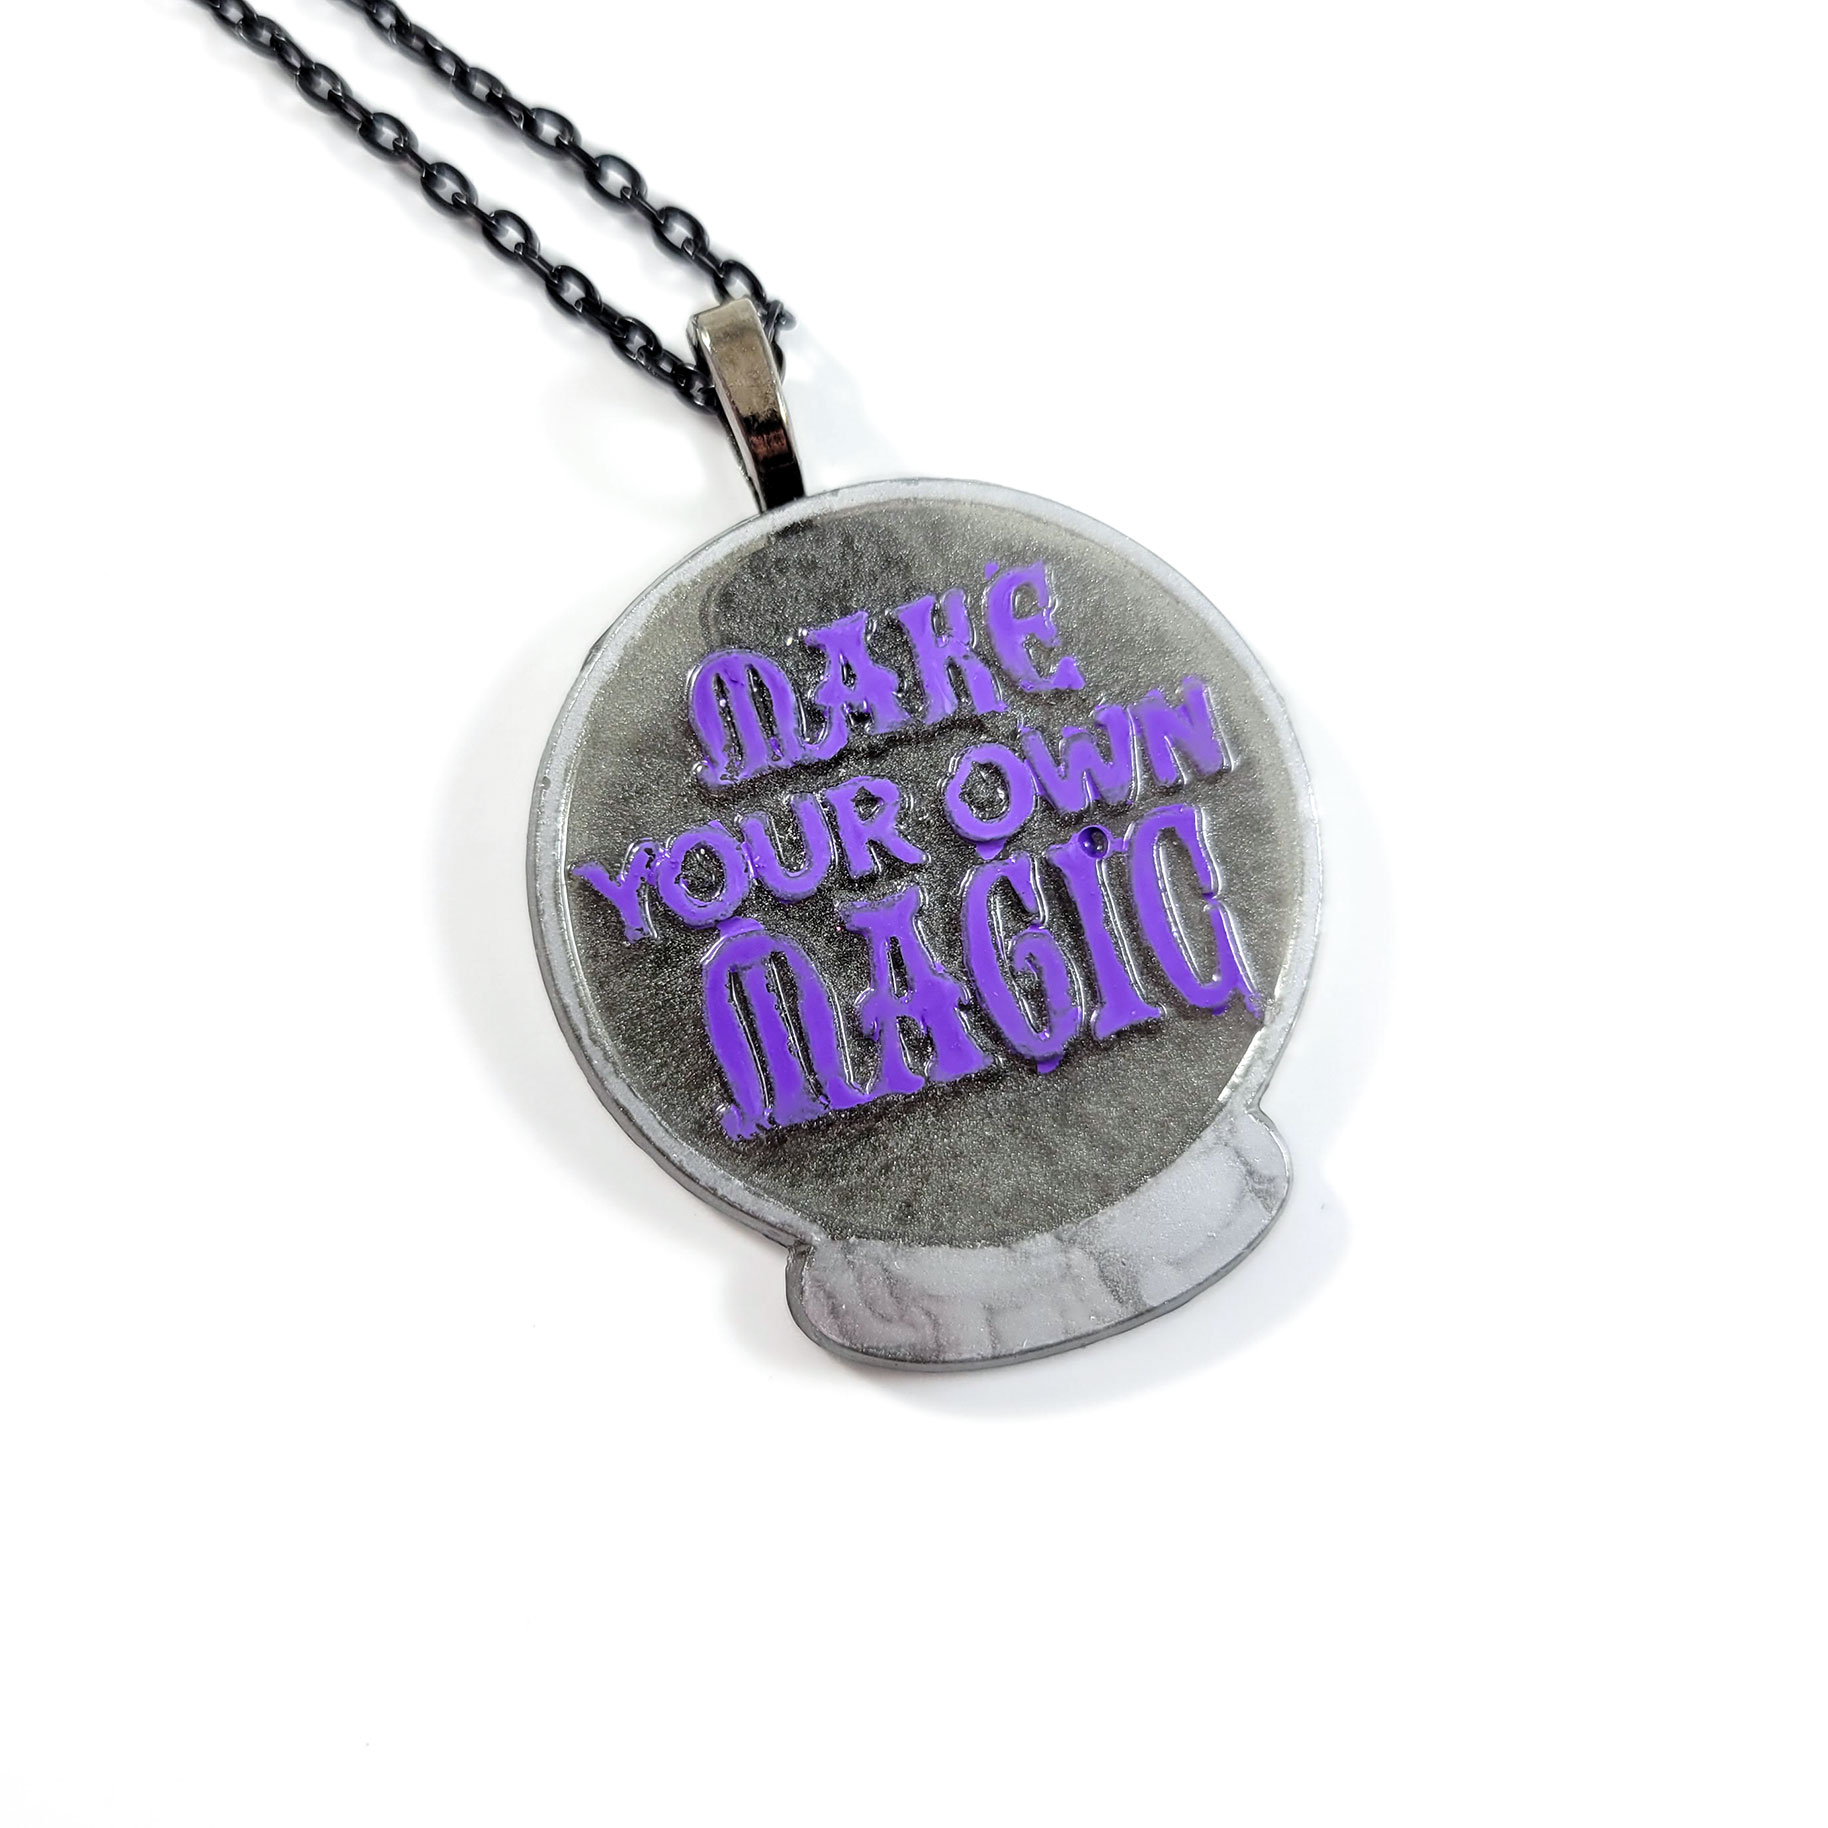 Make Your Own Magic Necklace by Wilde Designs